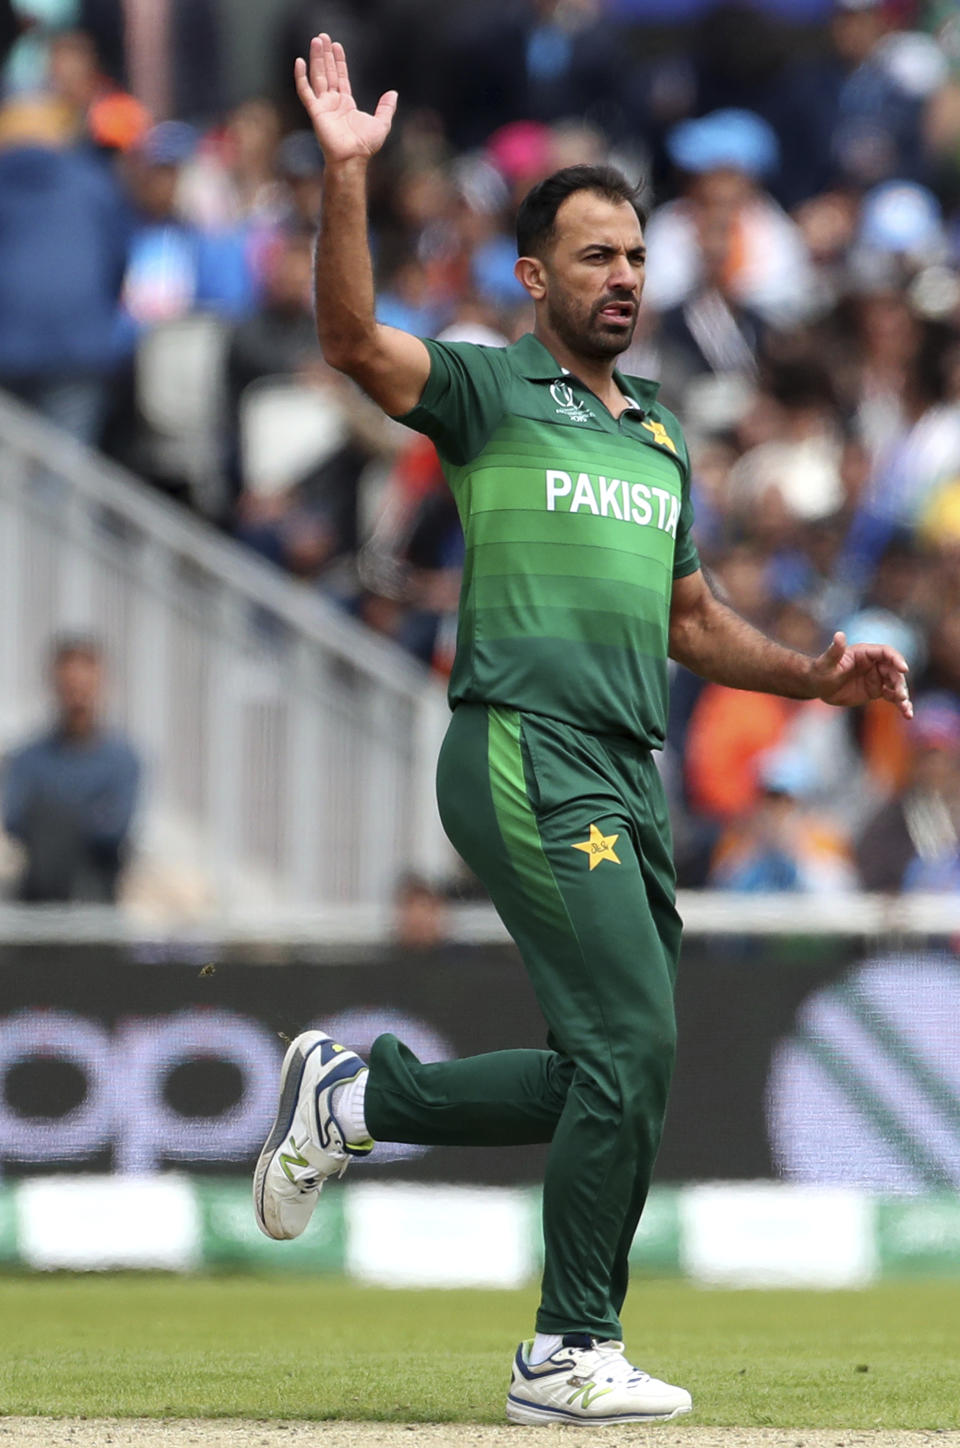 Pakistan's Wahab Riaz reacts after bowling a delivery to India's captain Virat Kohli during the Cricket World Cup match between India and Pakistan at Old Trafford in Manchester, England, Sunday, June 16, 2019. (AP Photo/Aijaz Rahi)